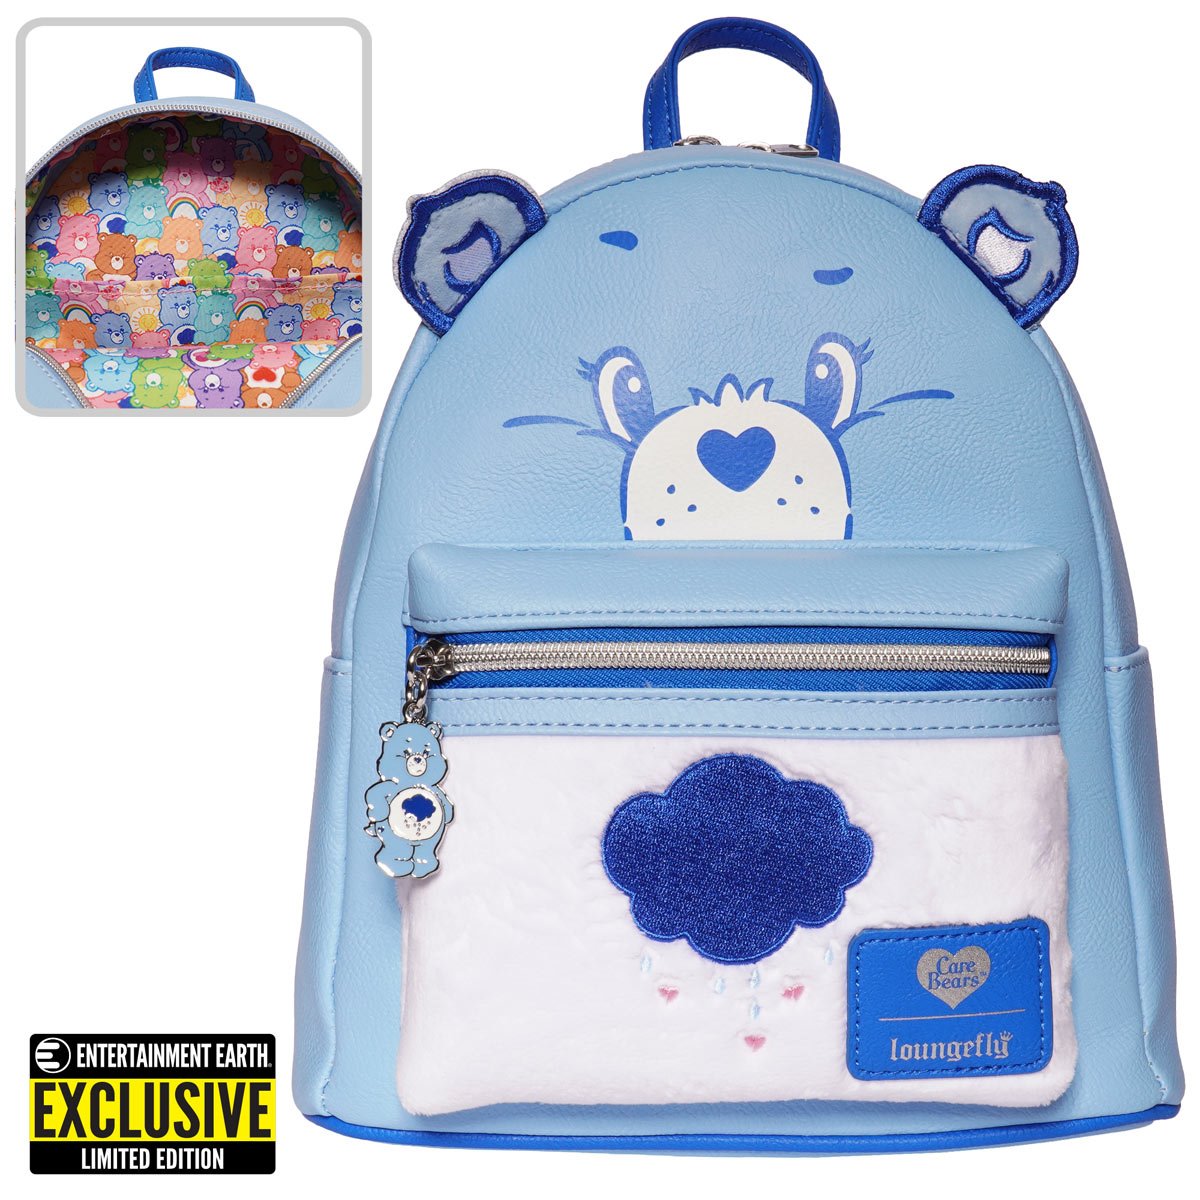 Care Bears - Grumpy Bear - Exclusive Mini Backpack by Loungefly